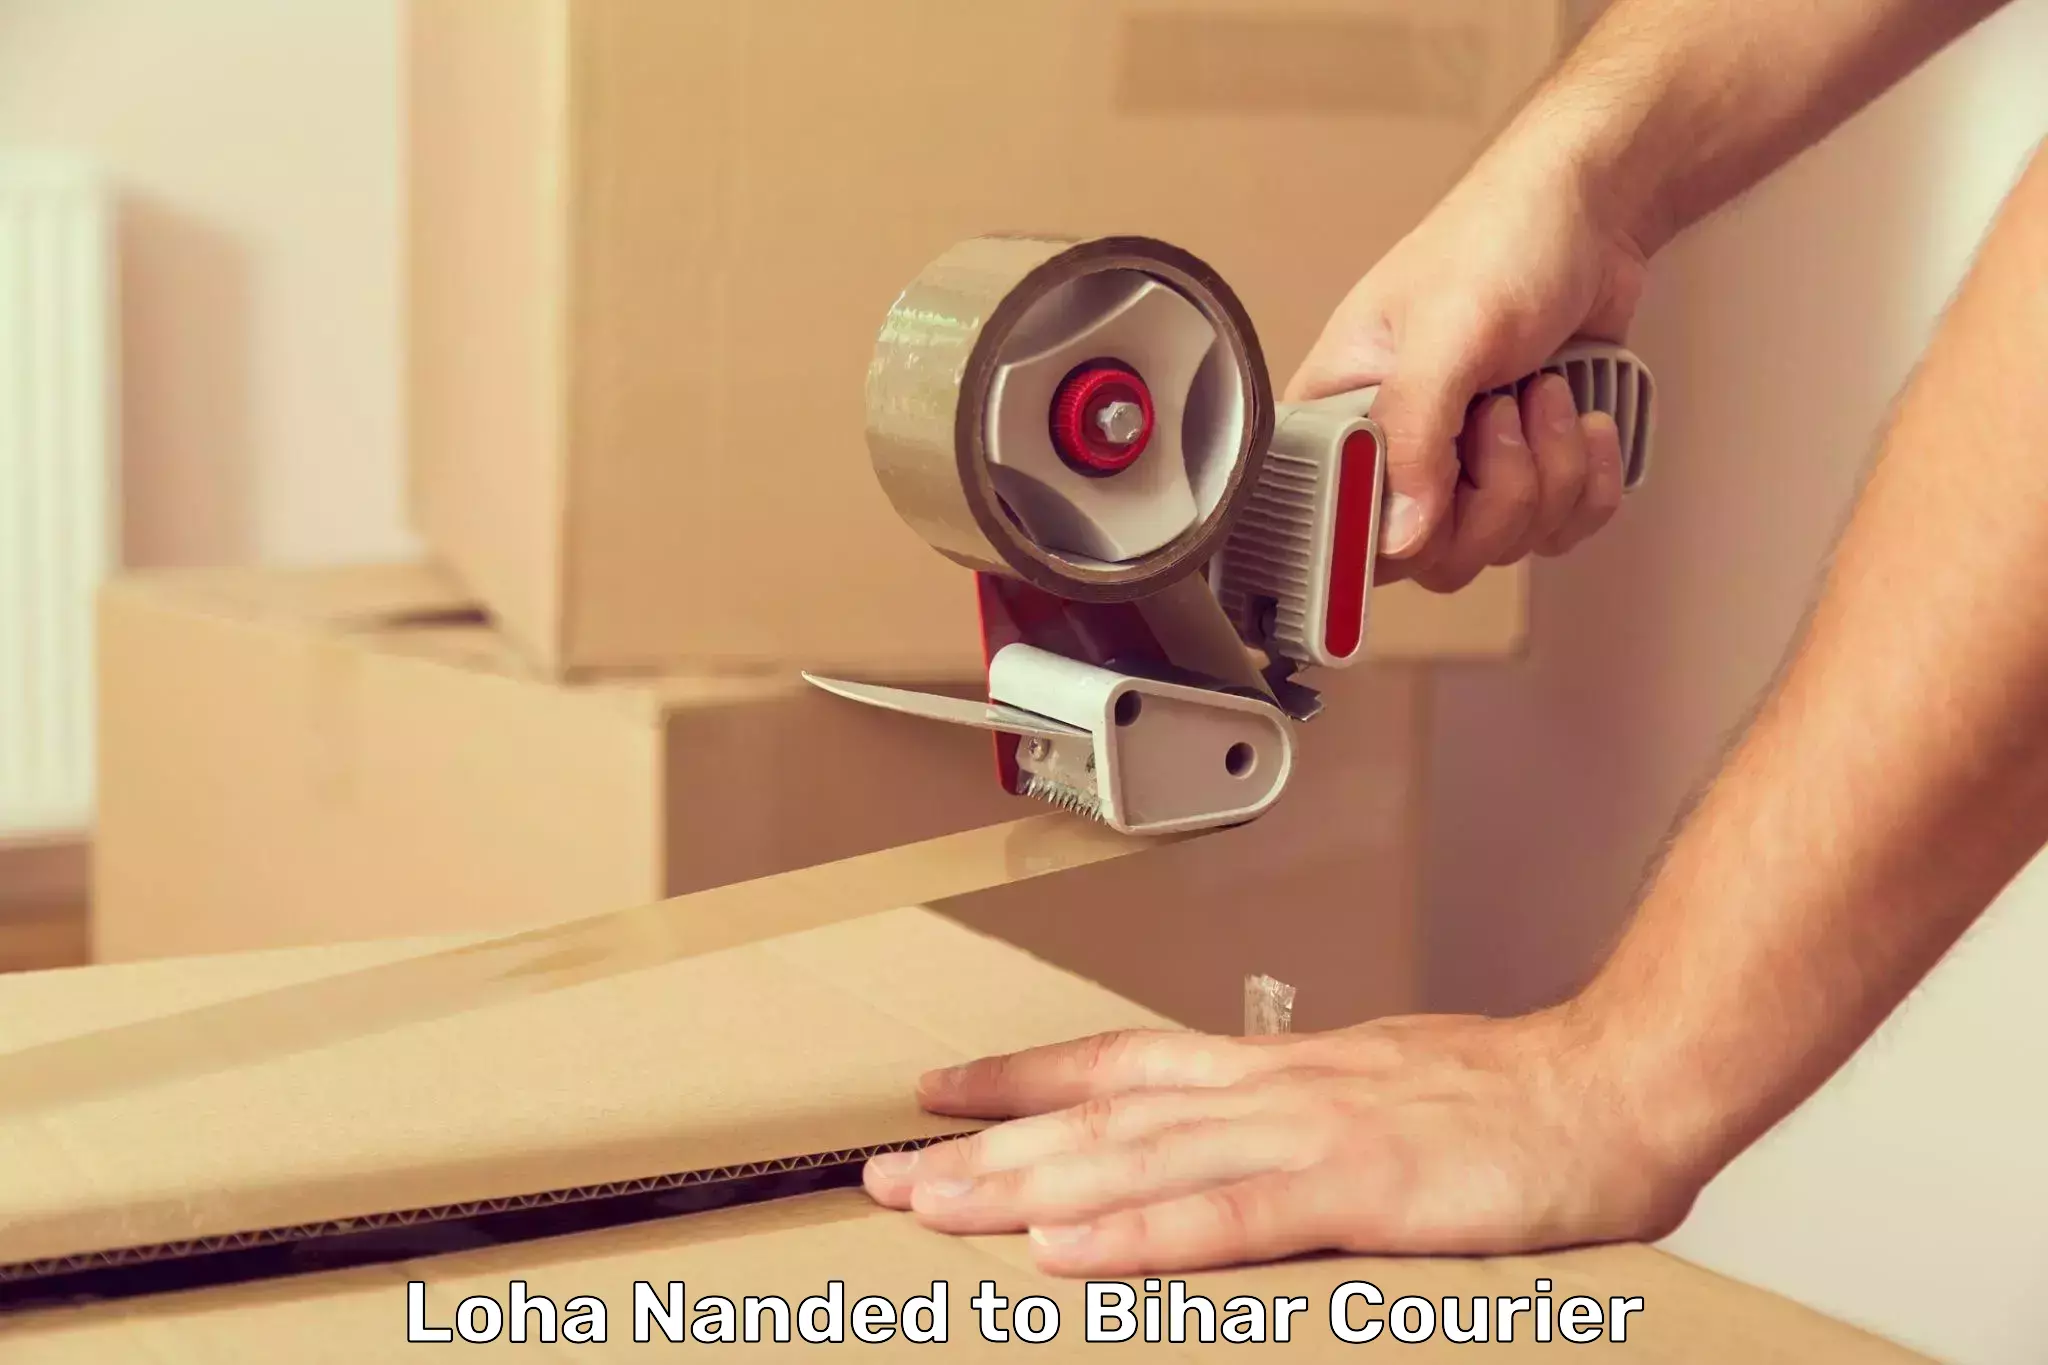 Courier service efficiency Loha Nanded to Kursela